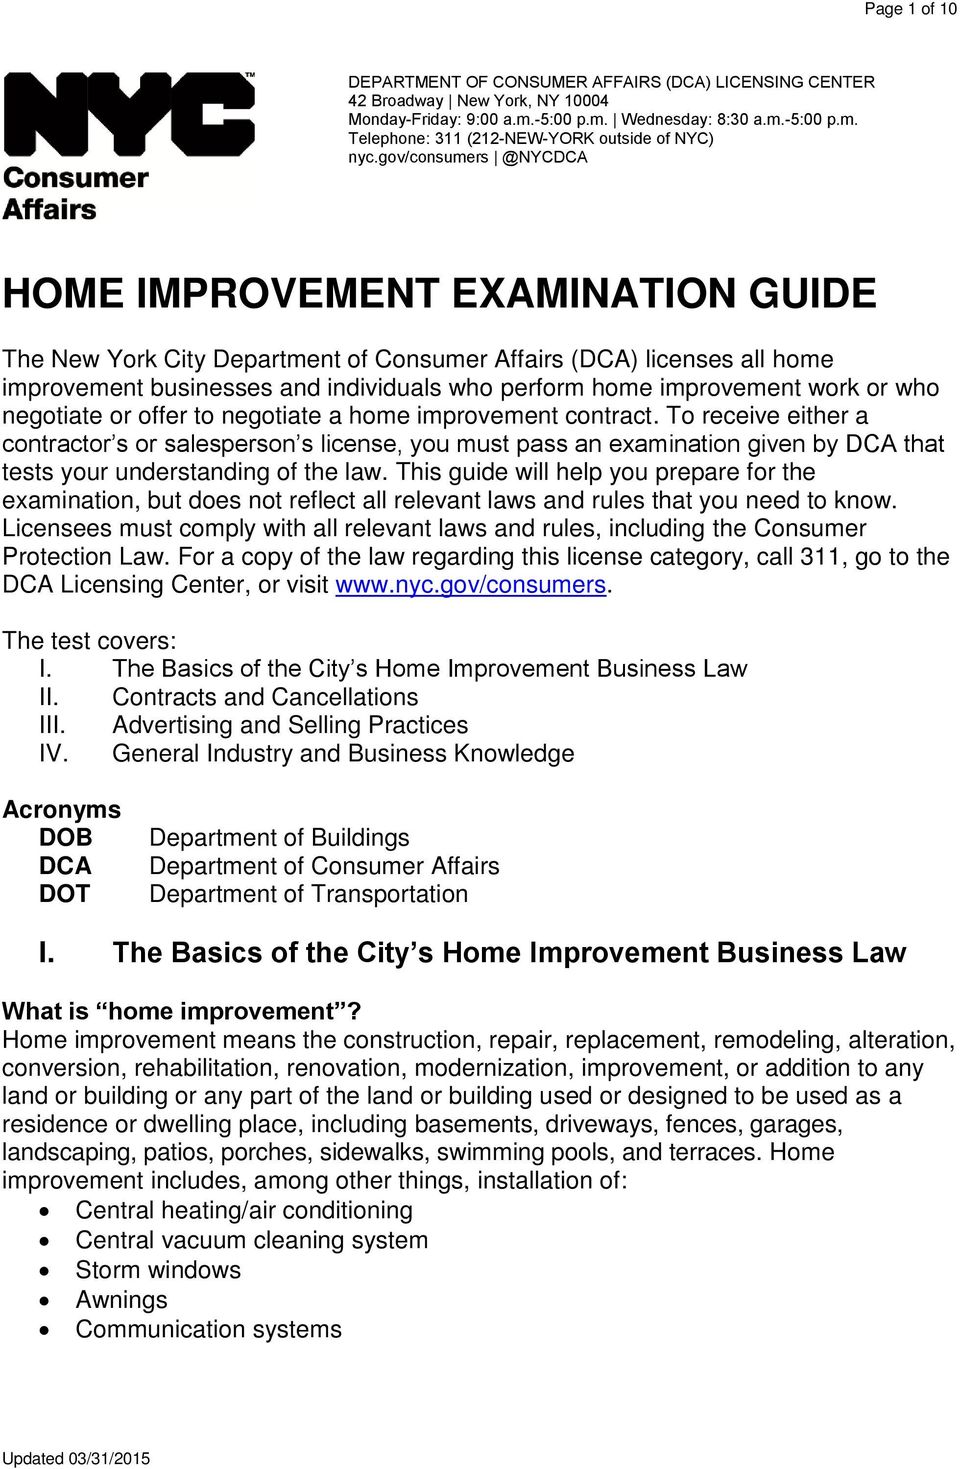 Home Improvement Examination Guide Pdf Free Download